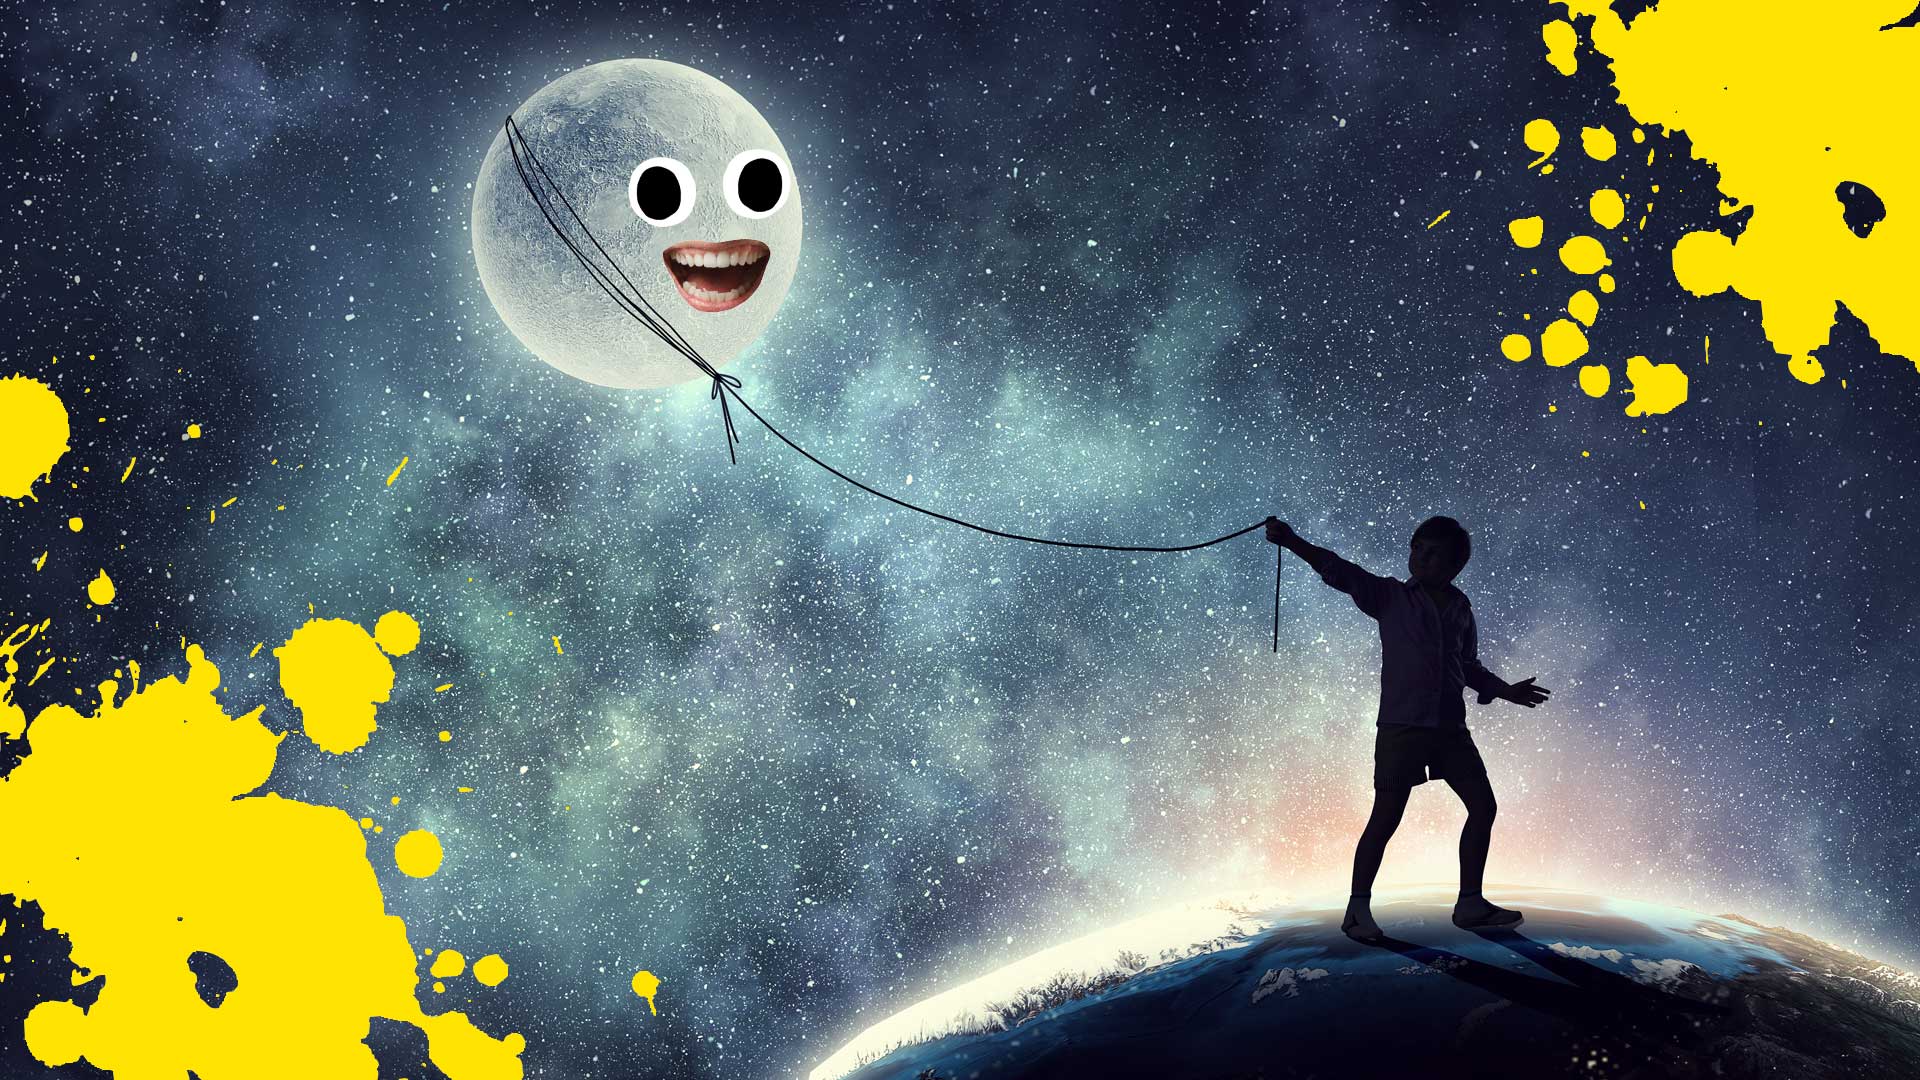 A dream involving the moon being walked like a pet dog